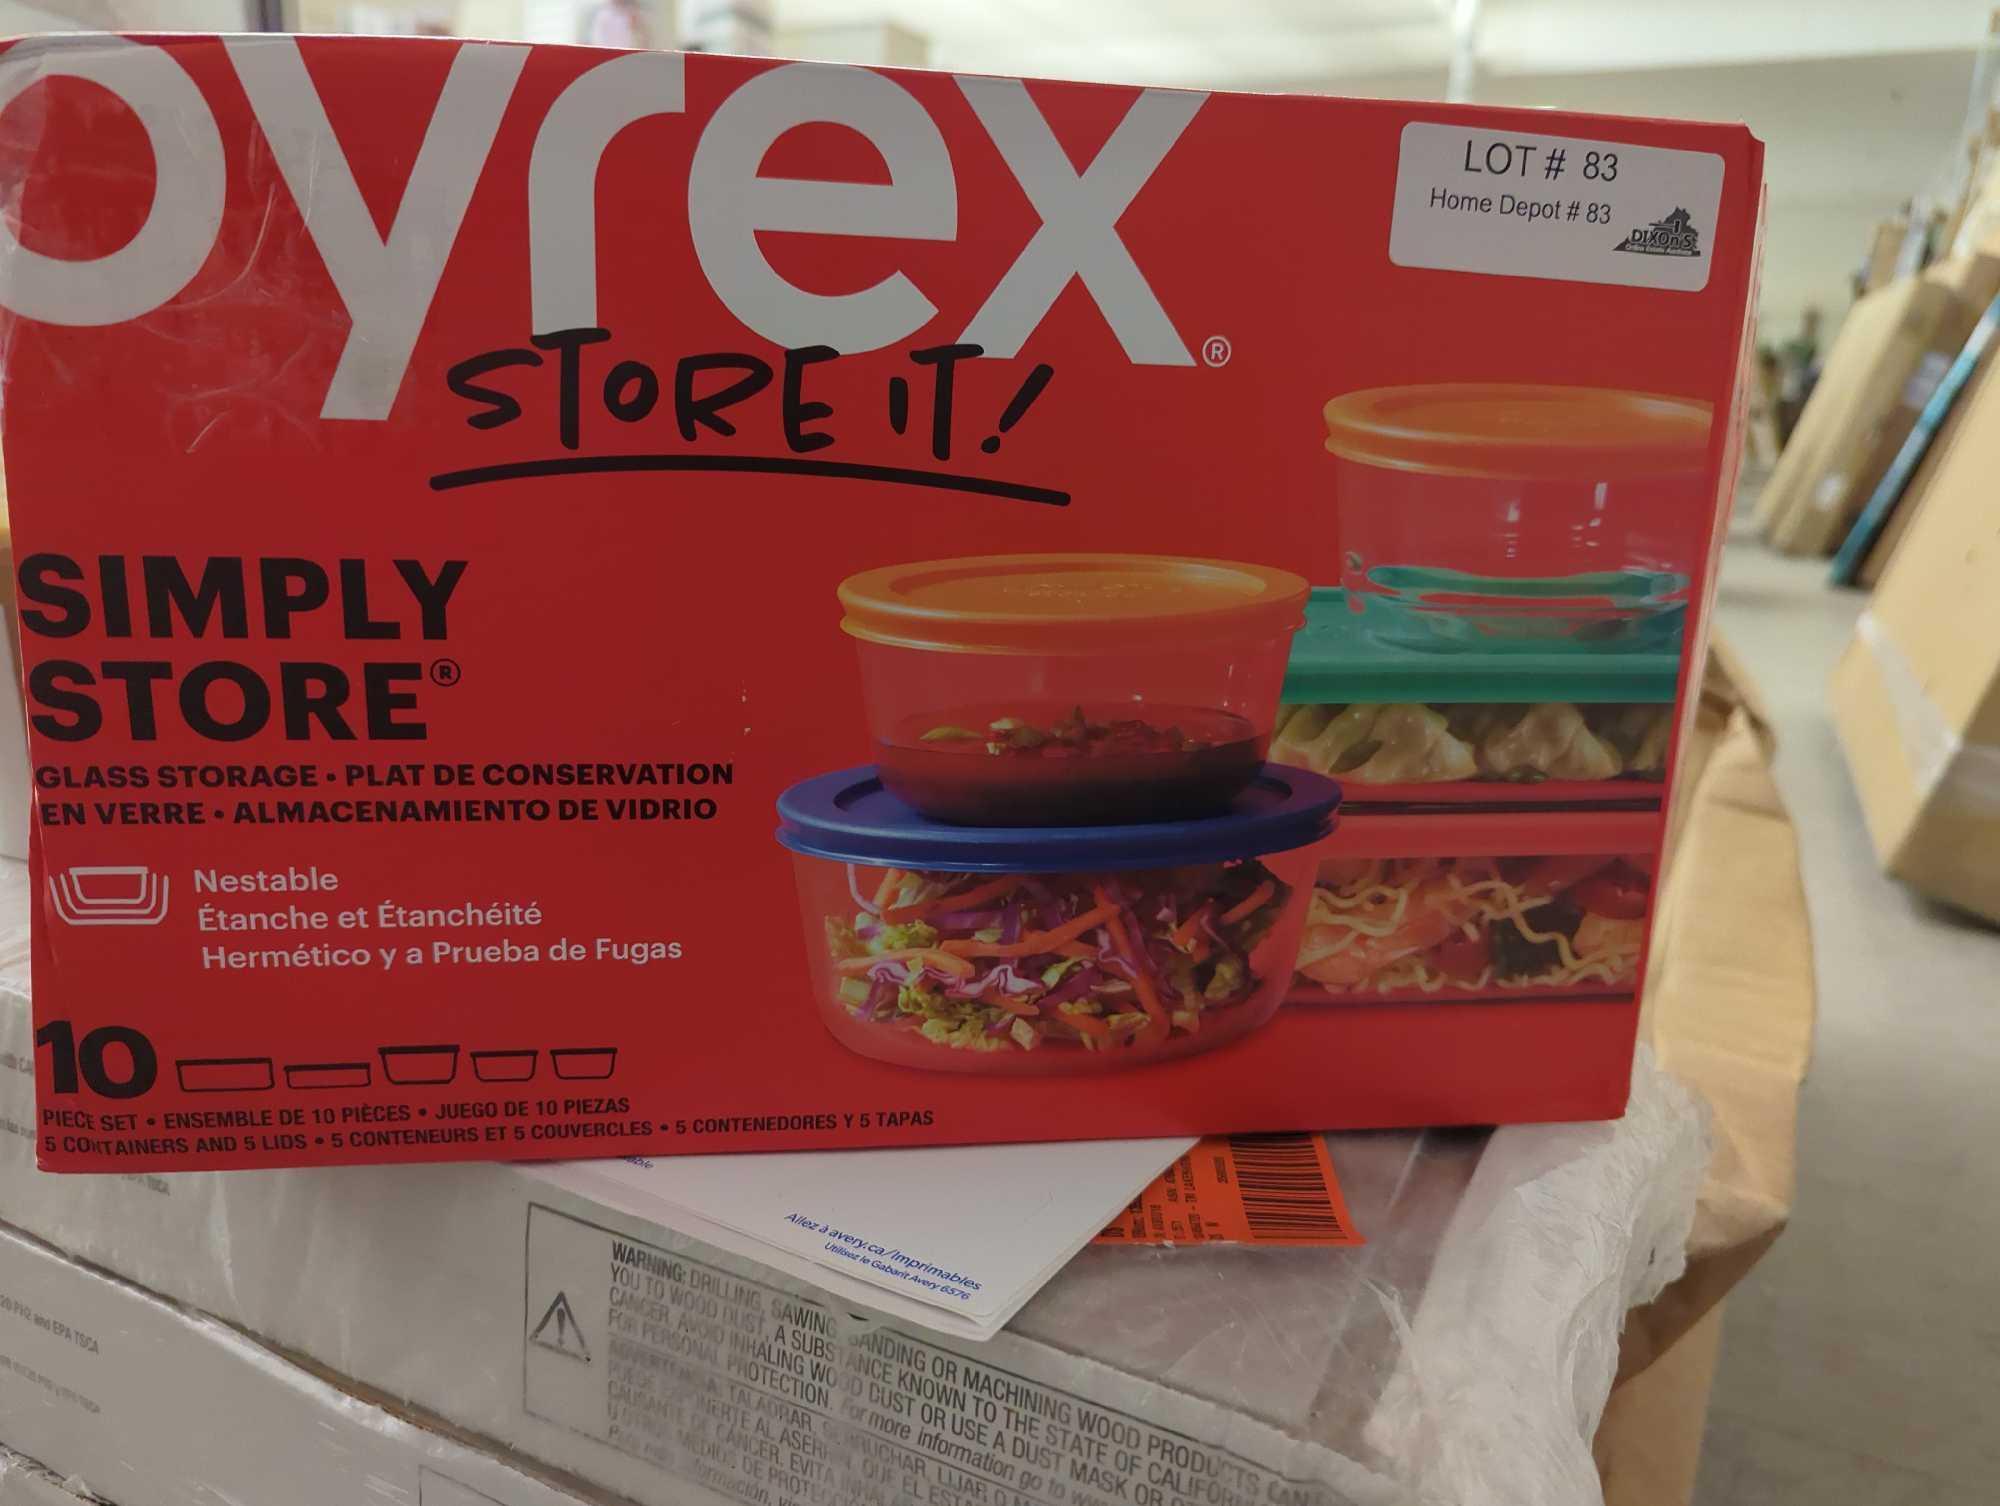 Pyrex Simply Store 10 Piece Glass Storage Bakeware Set with Assorted Colored Lids, Appears to be